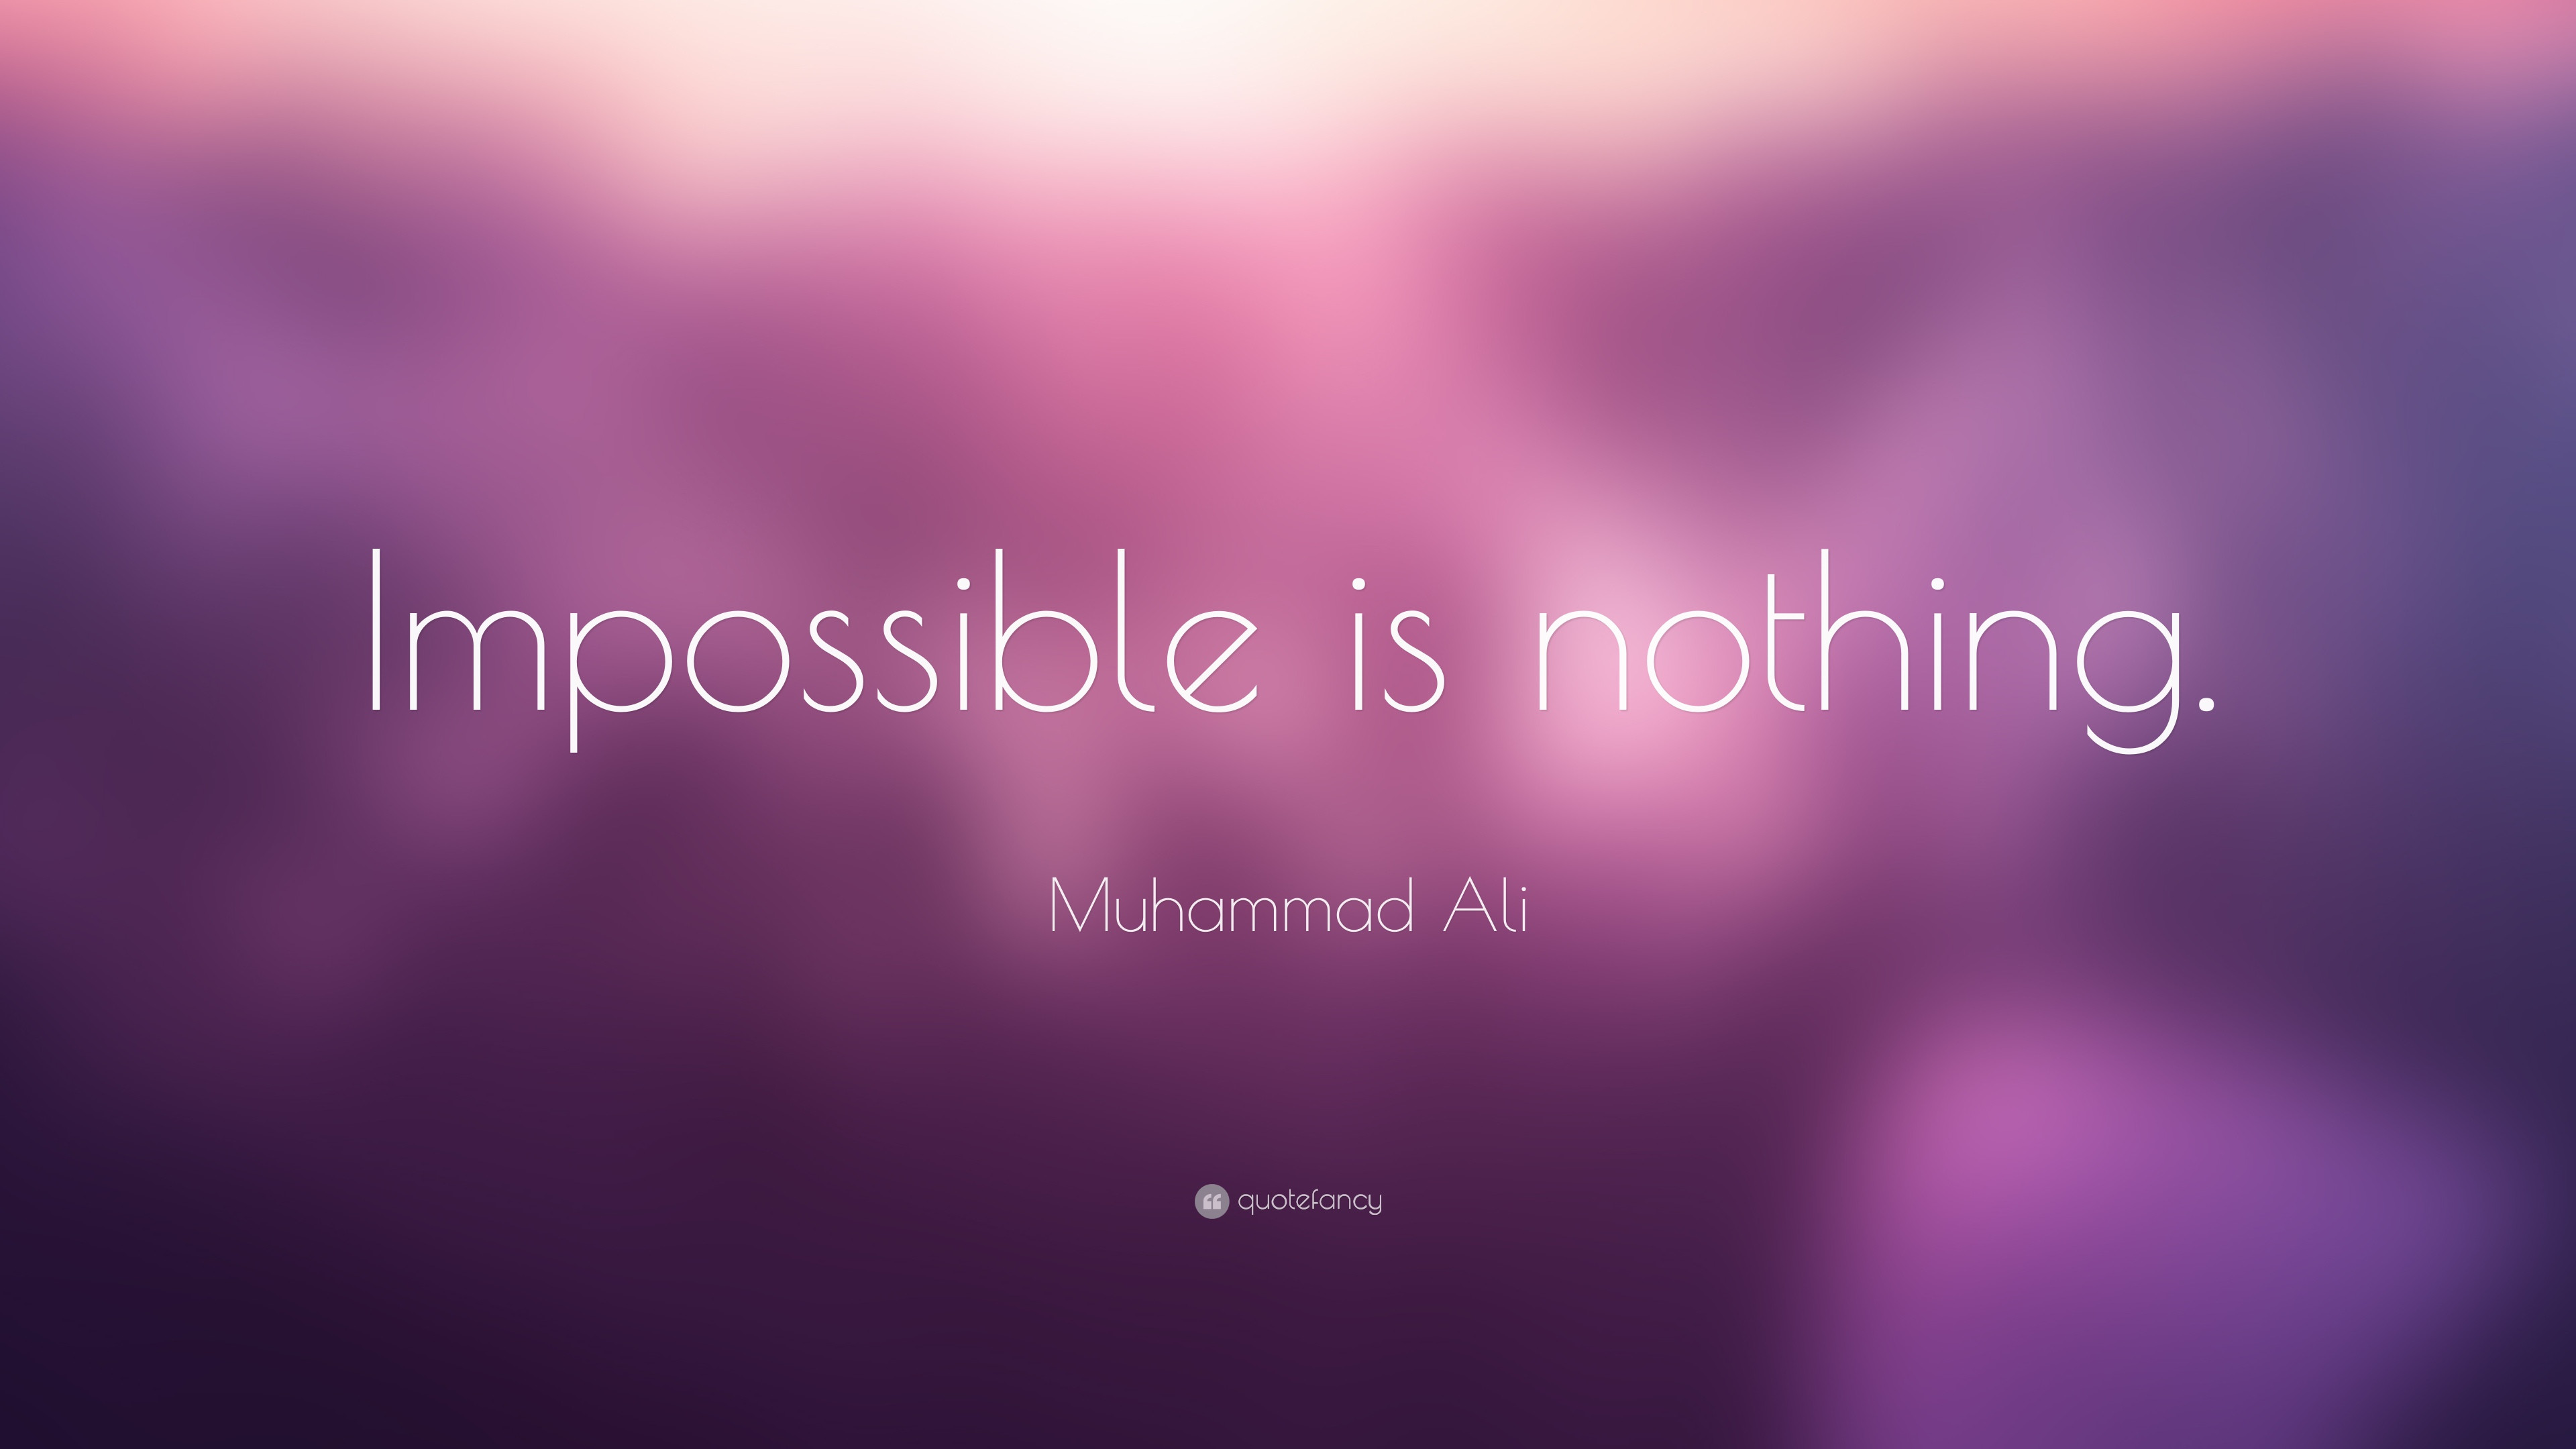 3840x2160 Impossible Is Nothing Quote Wallpaper Muhammad Ali Quote “Impossible Is  Nothing.